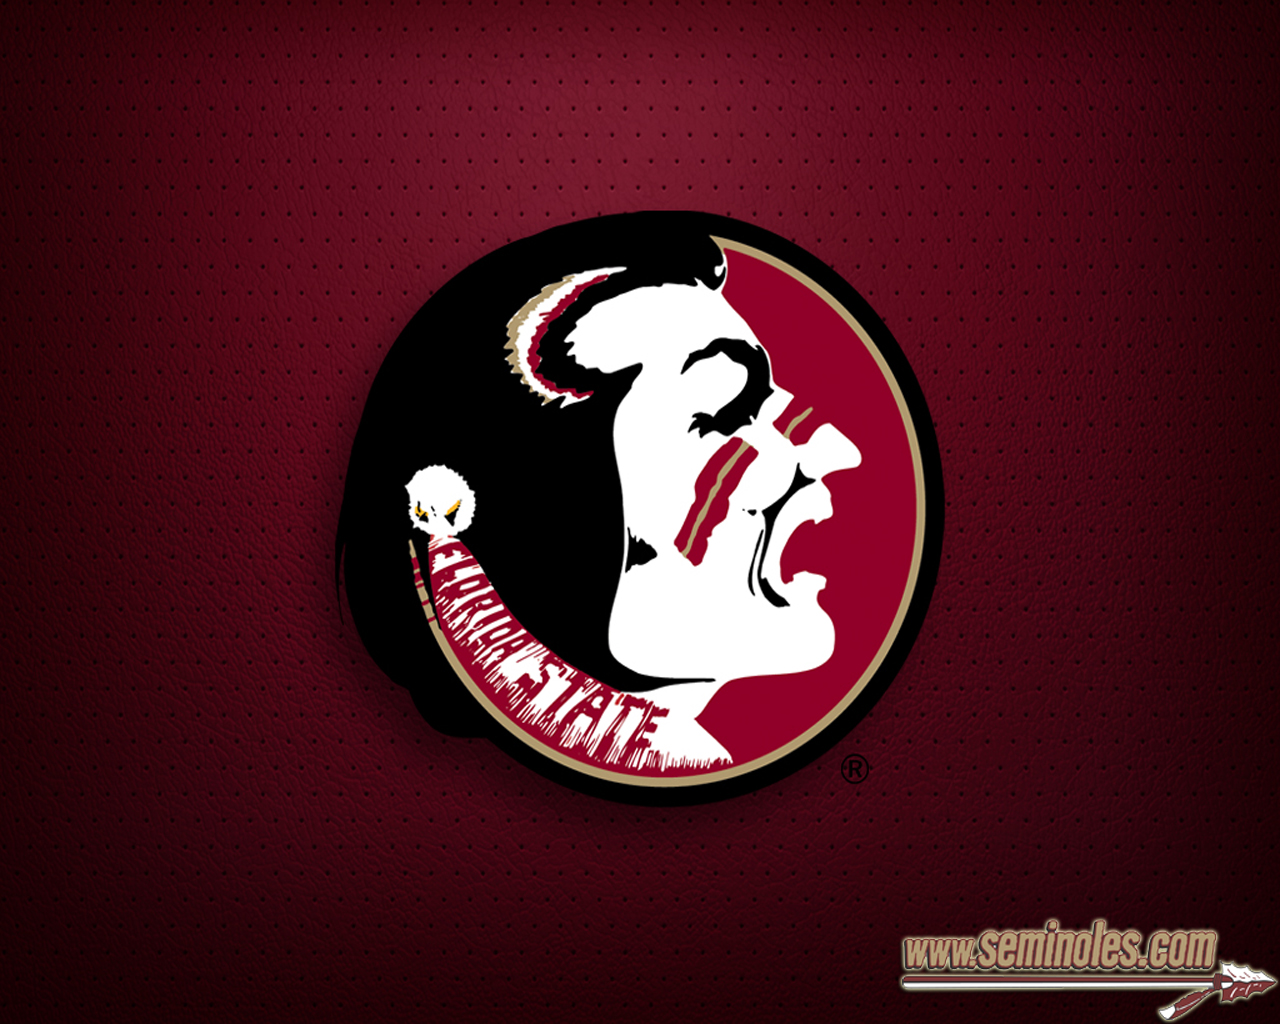 abstrack florida state seminoles football 775314 With Resolutions 1280 1280x1024